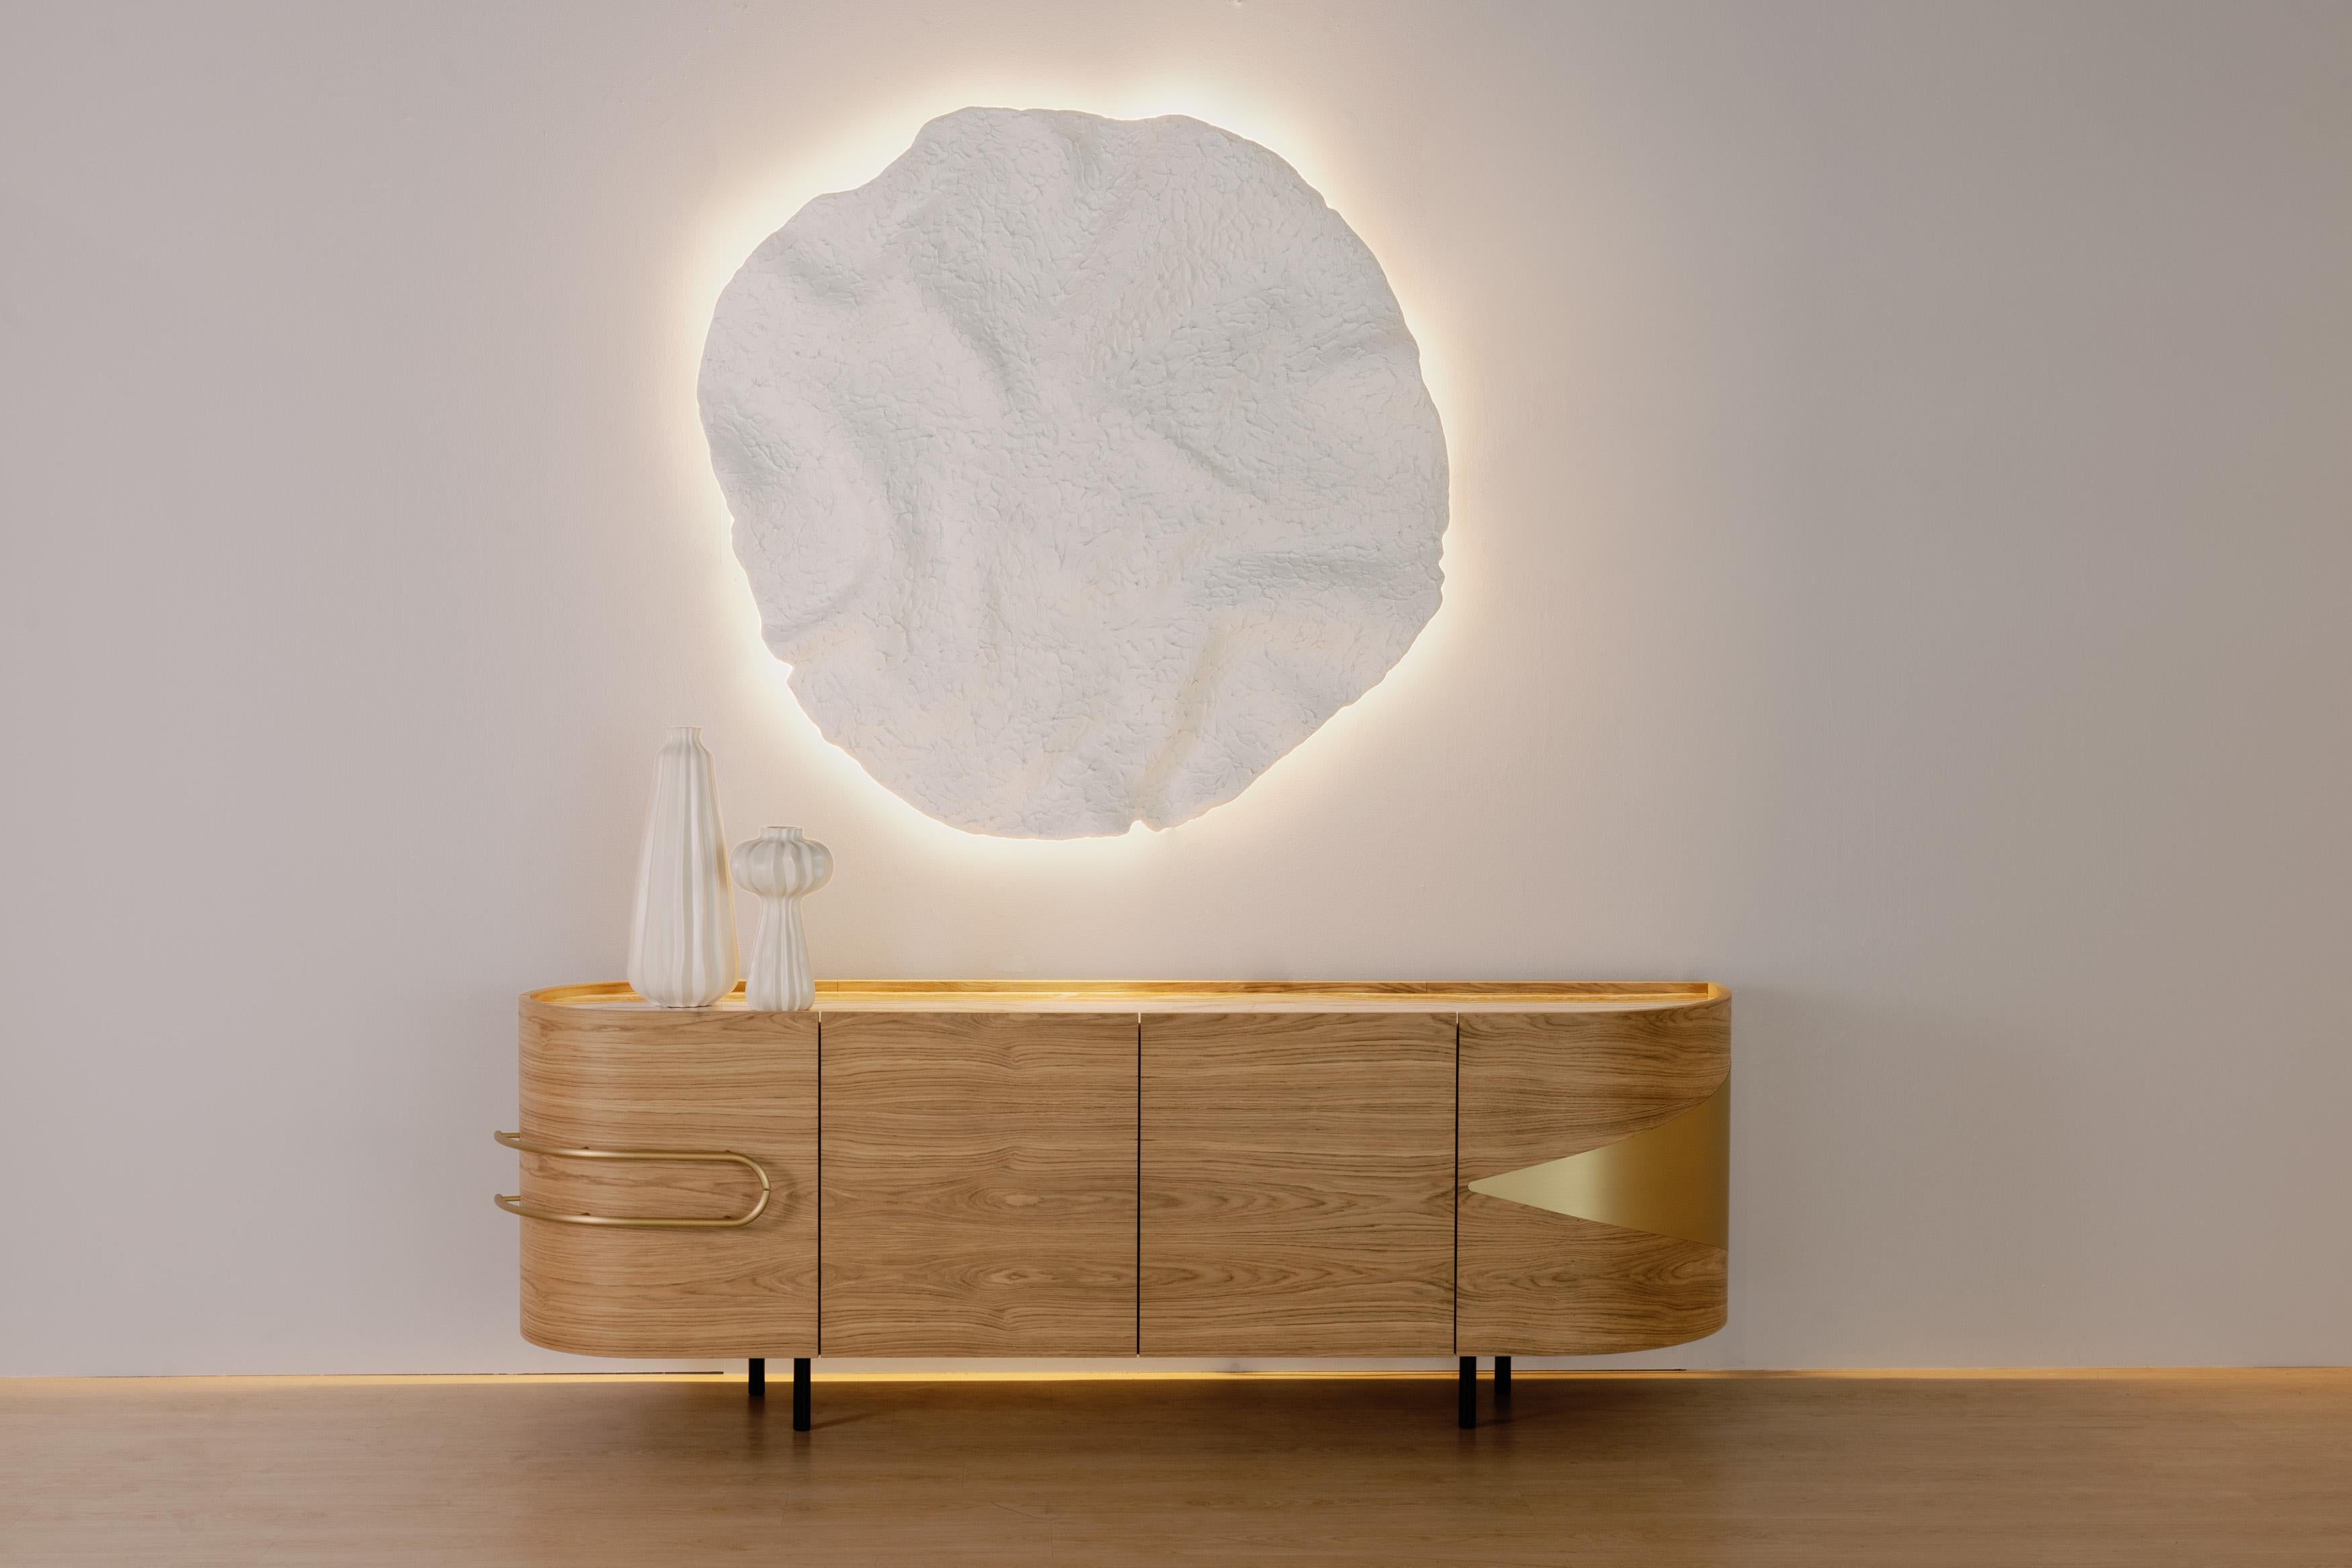 Olival Sideboard, Contemporary Collection, Handcrafted in Portugal - Europe by Greenapple.

Designed by Rute Martins for the Contemporary Collection, the Olival modern sideboard is inspired by the sacred symbolism of the ancient Greek olive tree,